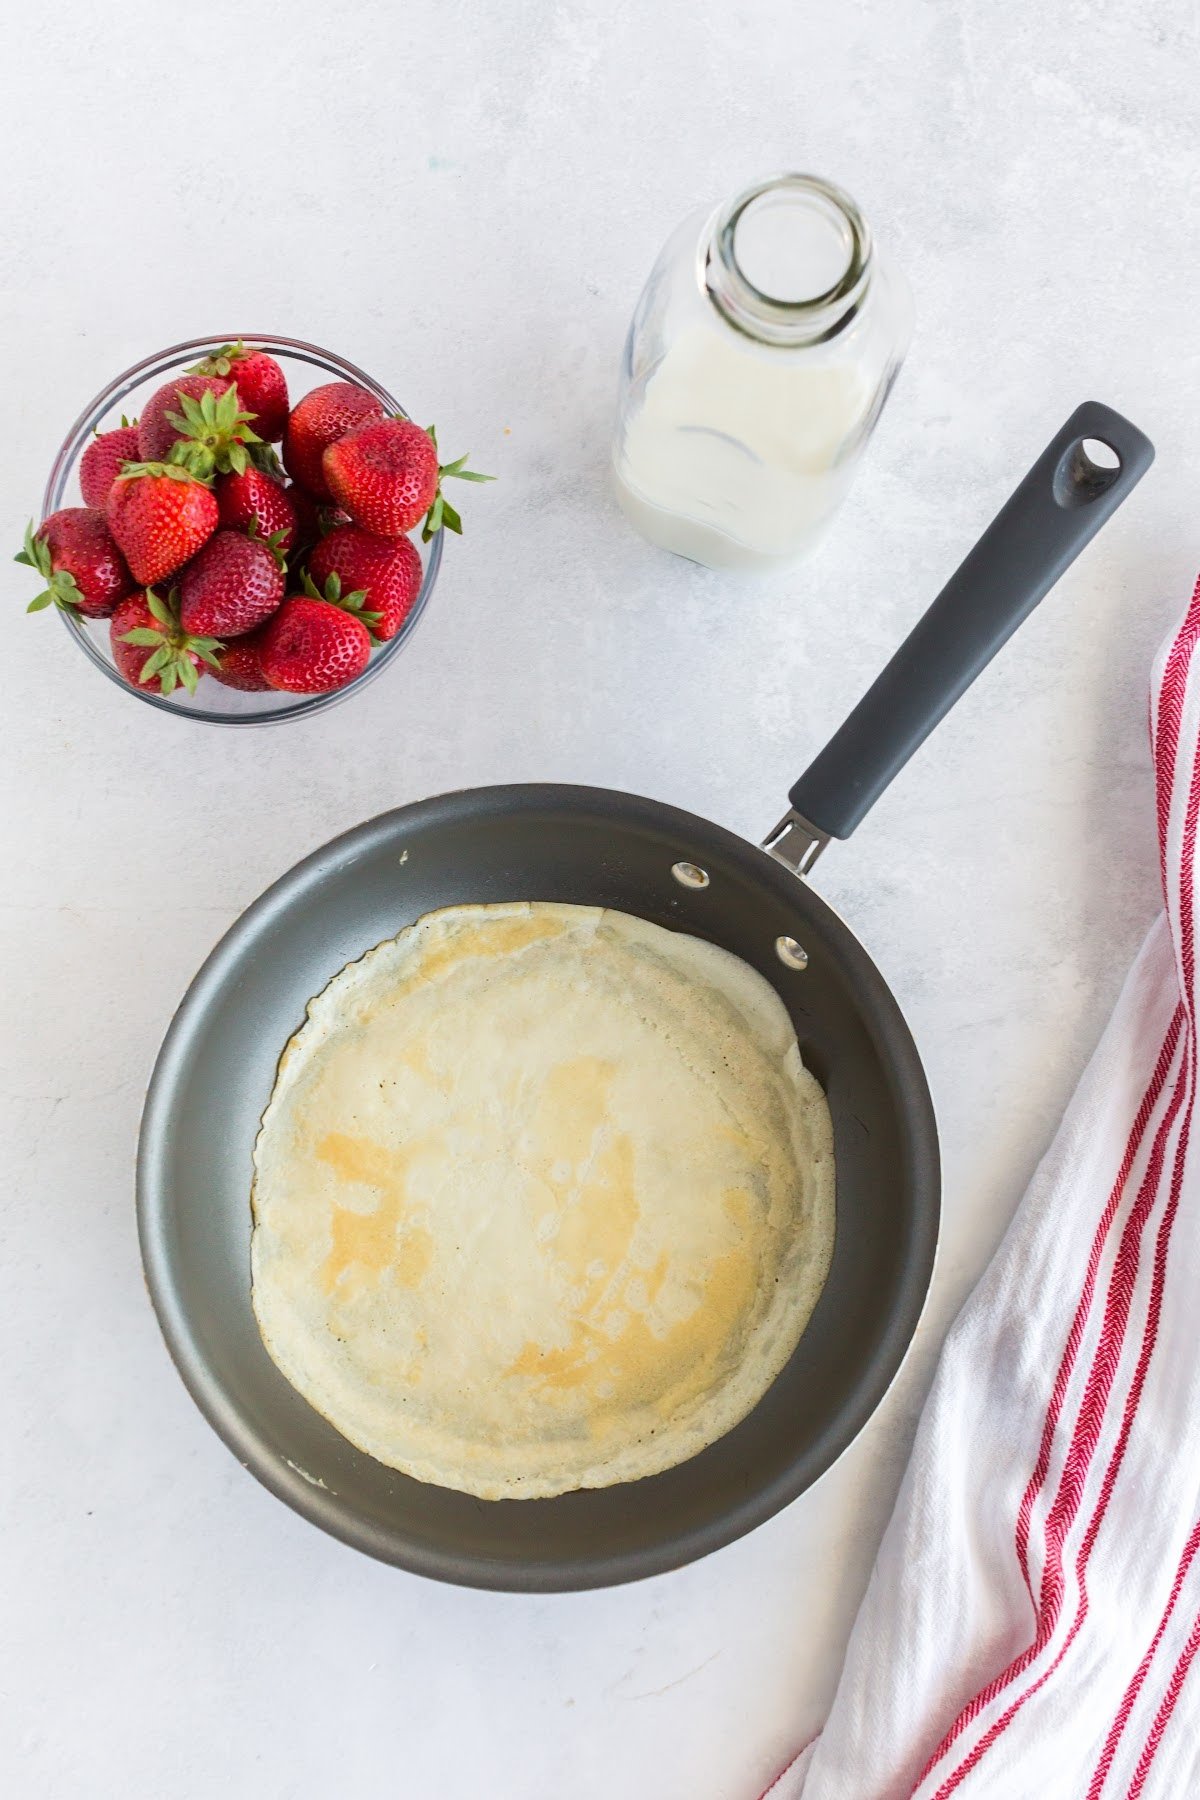 Flipping the breakfast crepe over.